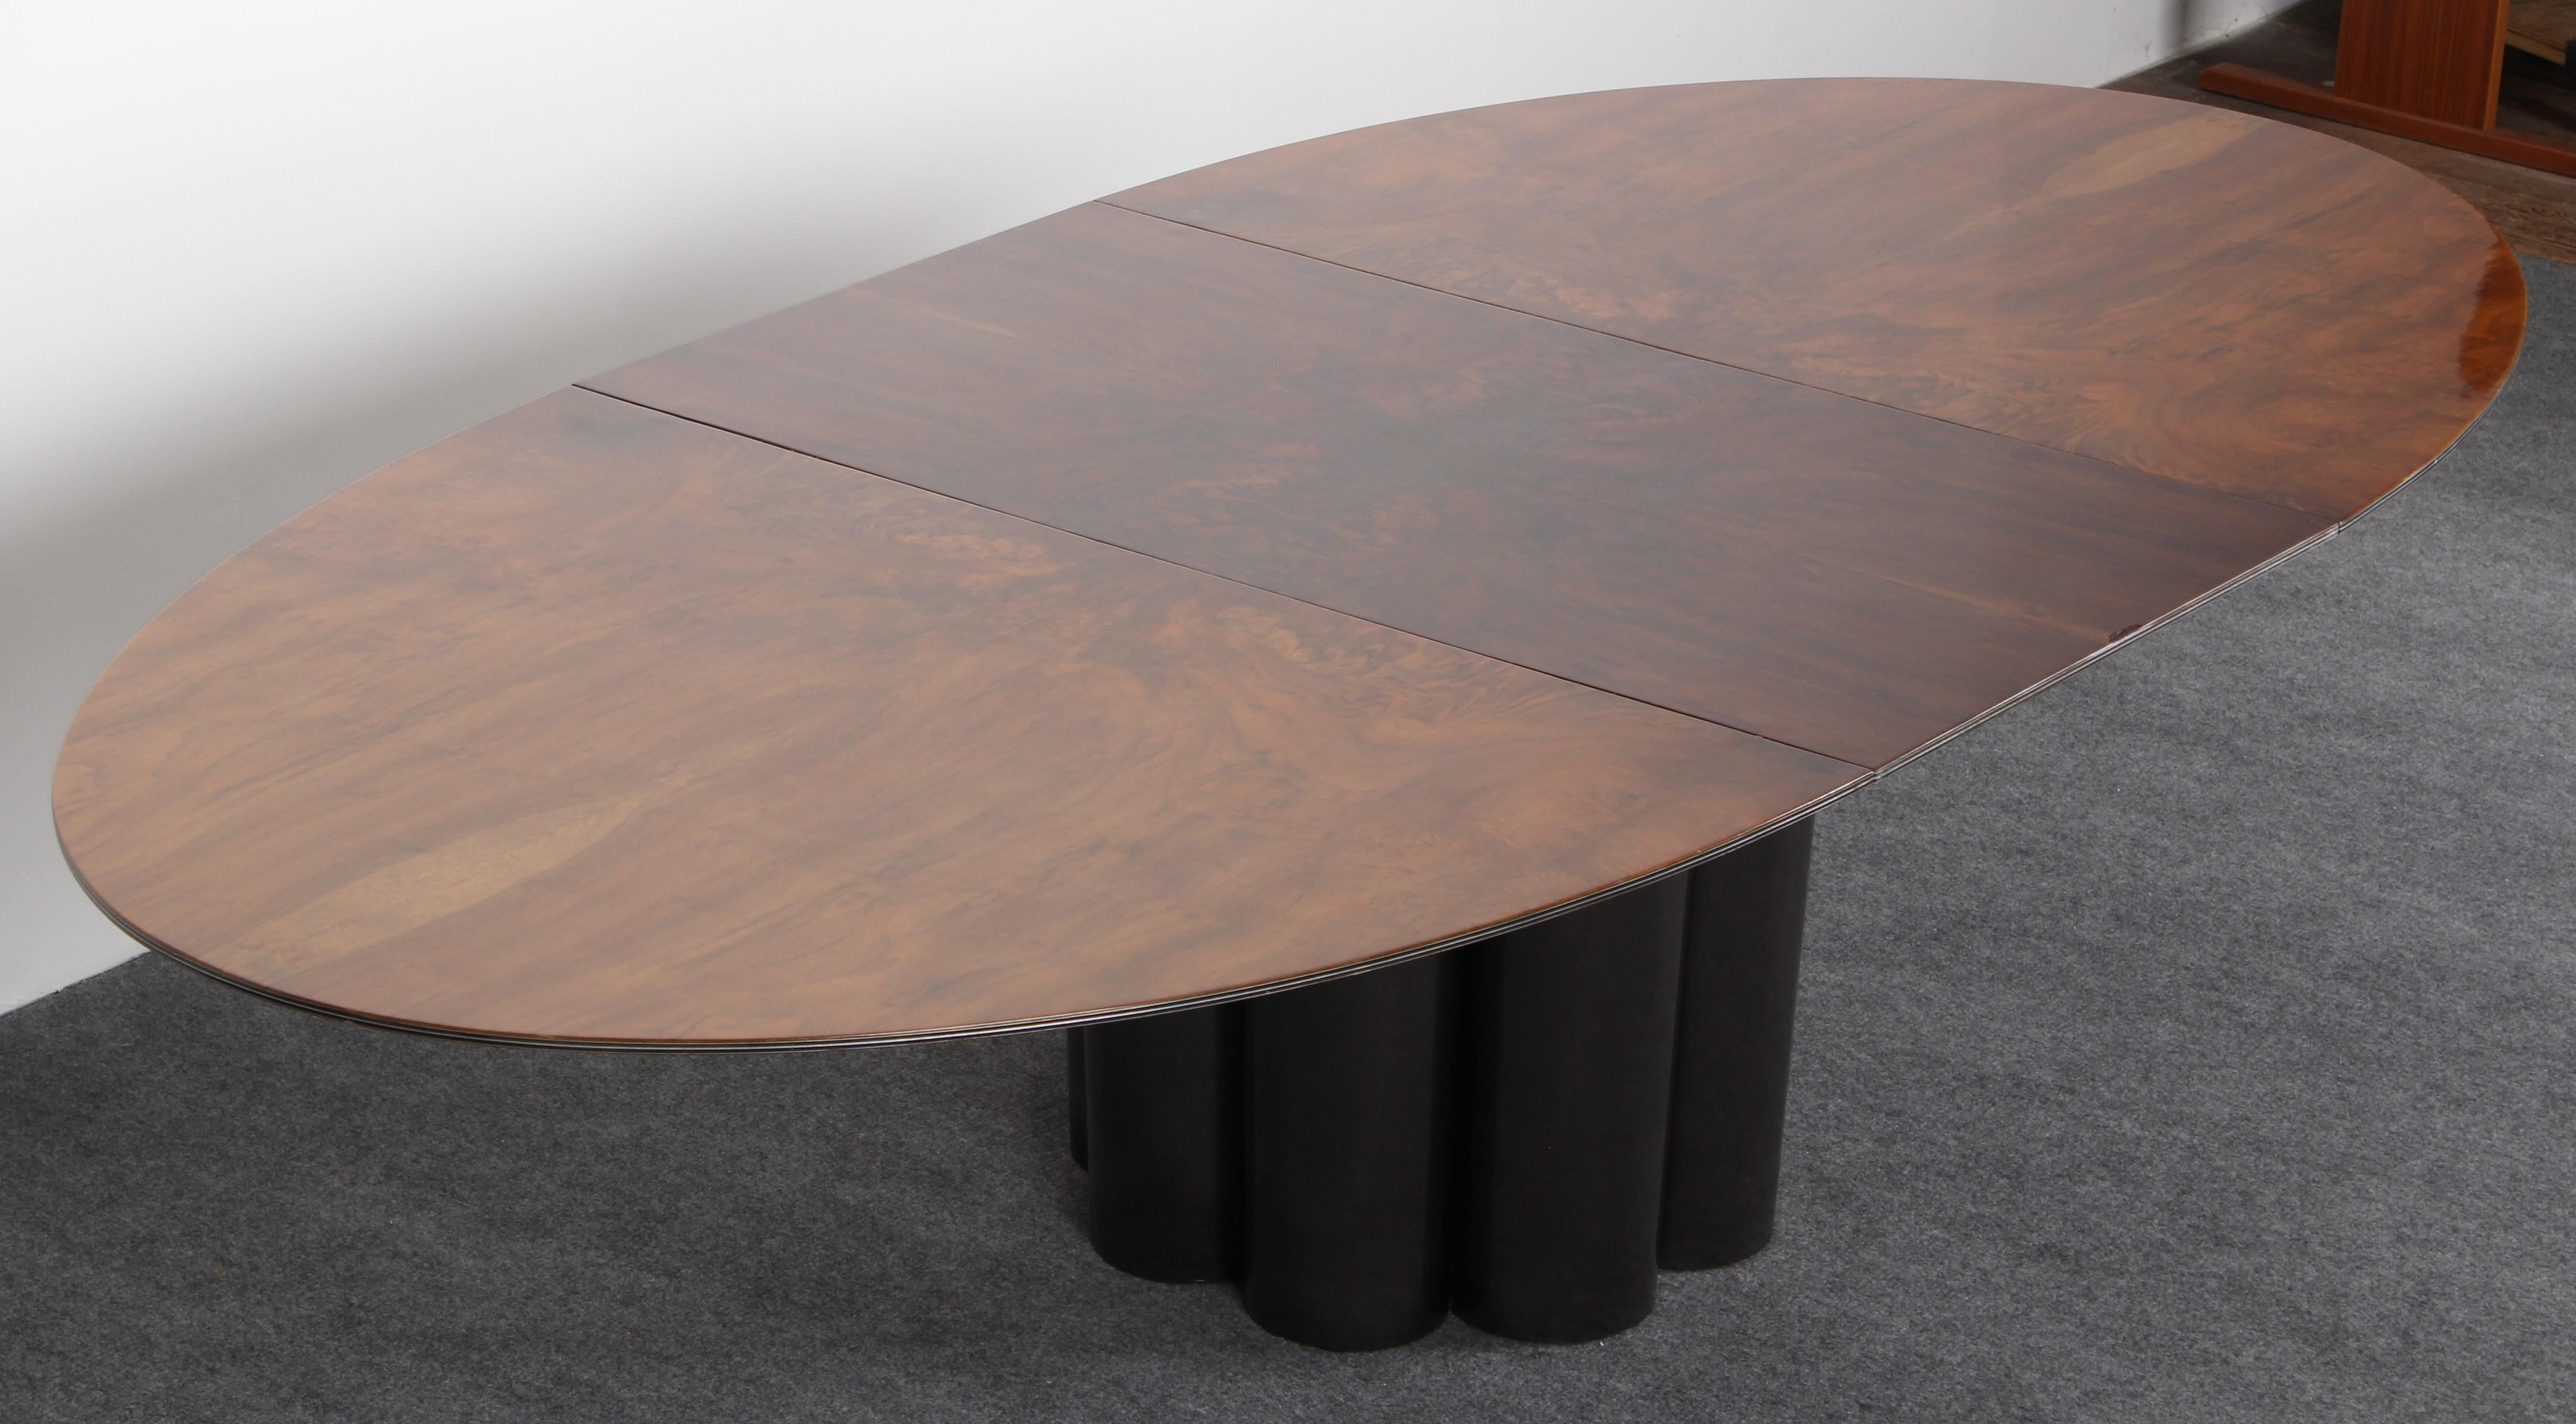 A gorgeous burl walnut dining table designed by Paul Evans for Directional, 1975. Verified by Dorsey Reading as 